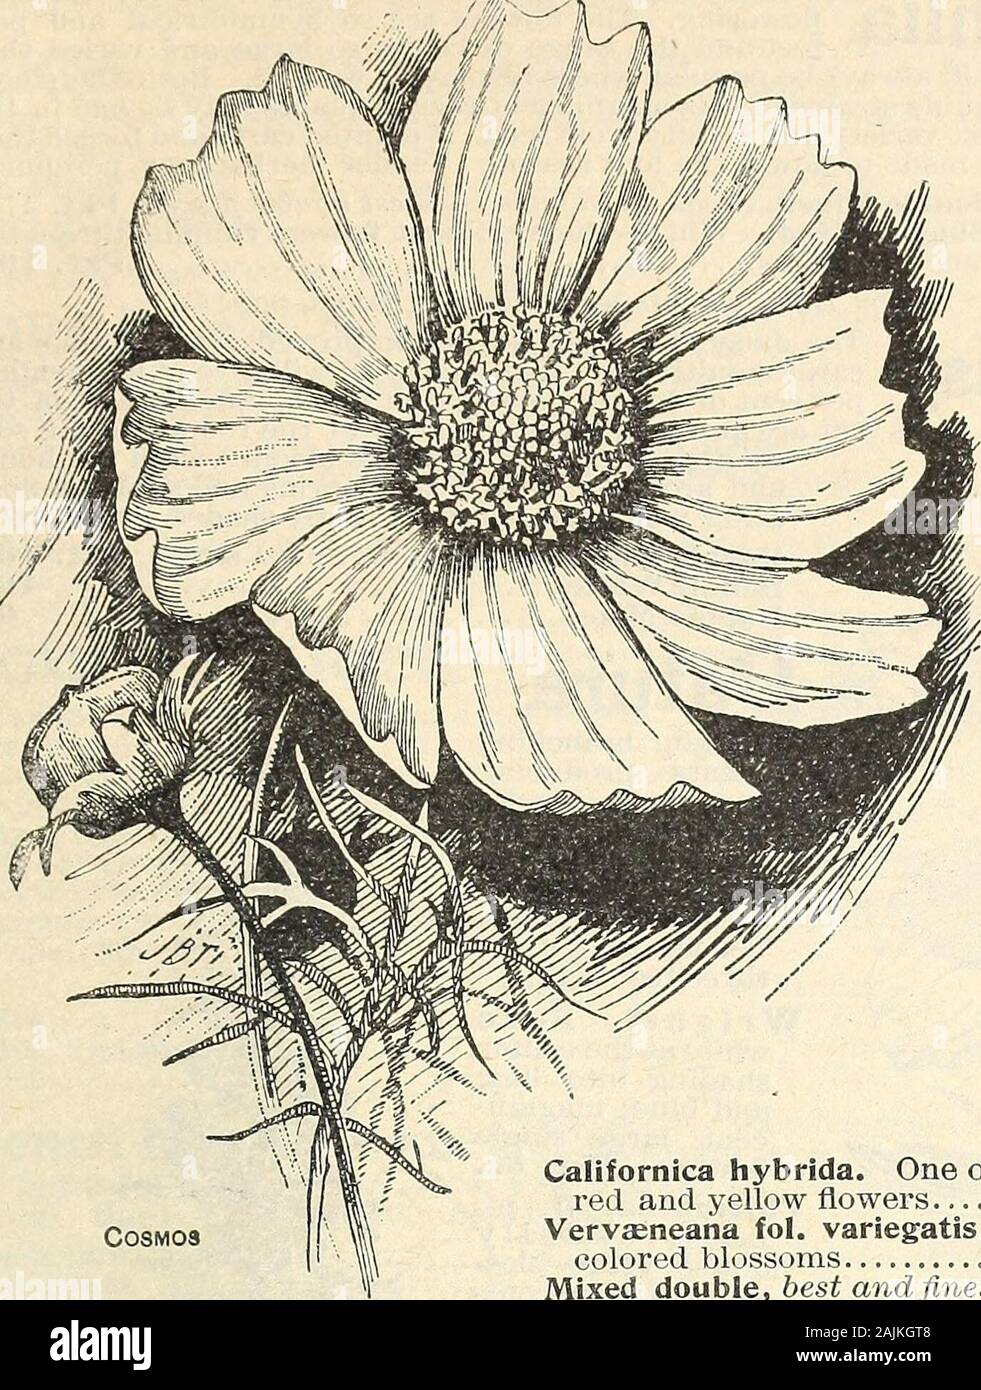 Seed annual 1908 . D. M. FERRY & GOS DESCRIPTIVE CATALOGUE 75. 0 1     C^«»J^«,c A fine rapid growing V^ODAea. OCanueilb climber with handsomefoUage and large bell-shaped fiowers, green at first,but rapidly changing to a beautiful deep violet-blue.A well established plant will run about thirty feet in aseason,covering a large veranda with handsome foliageand beautiful flowers. Tender perennial Pkt. 5c. COCKSCOMB—(See Celosia). COIX LACHRYMA—CSee Jobs Tears). COLEUS (Aquilegia). Everywell regulated gar- Probably the best known andmost popular of ornamentalfoliage plants. Leaves are ofmany shad Stock Photo